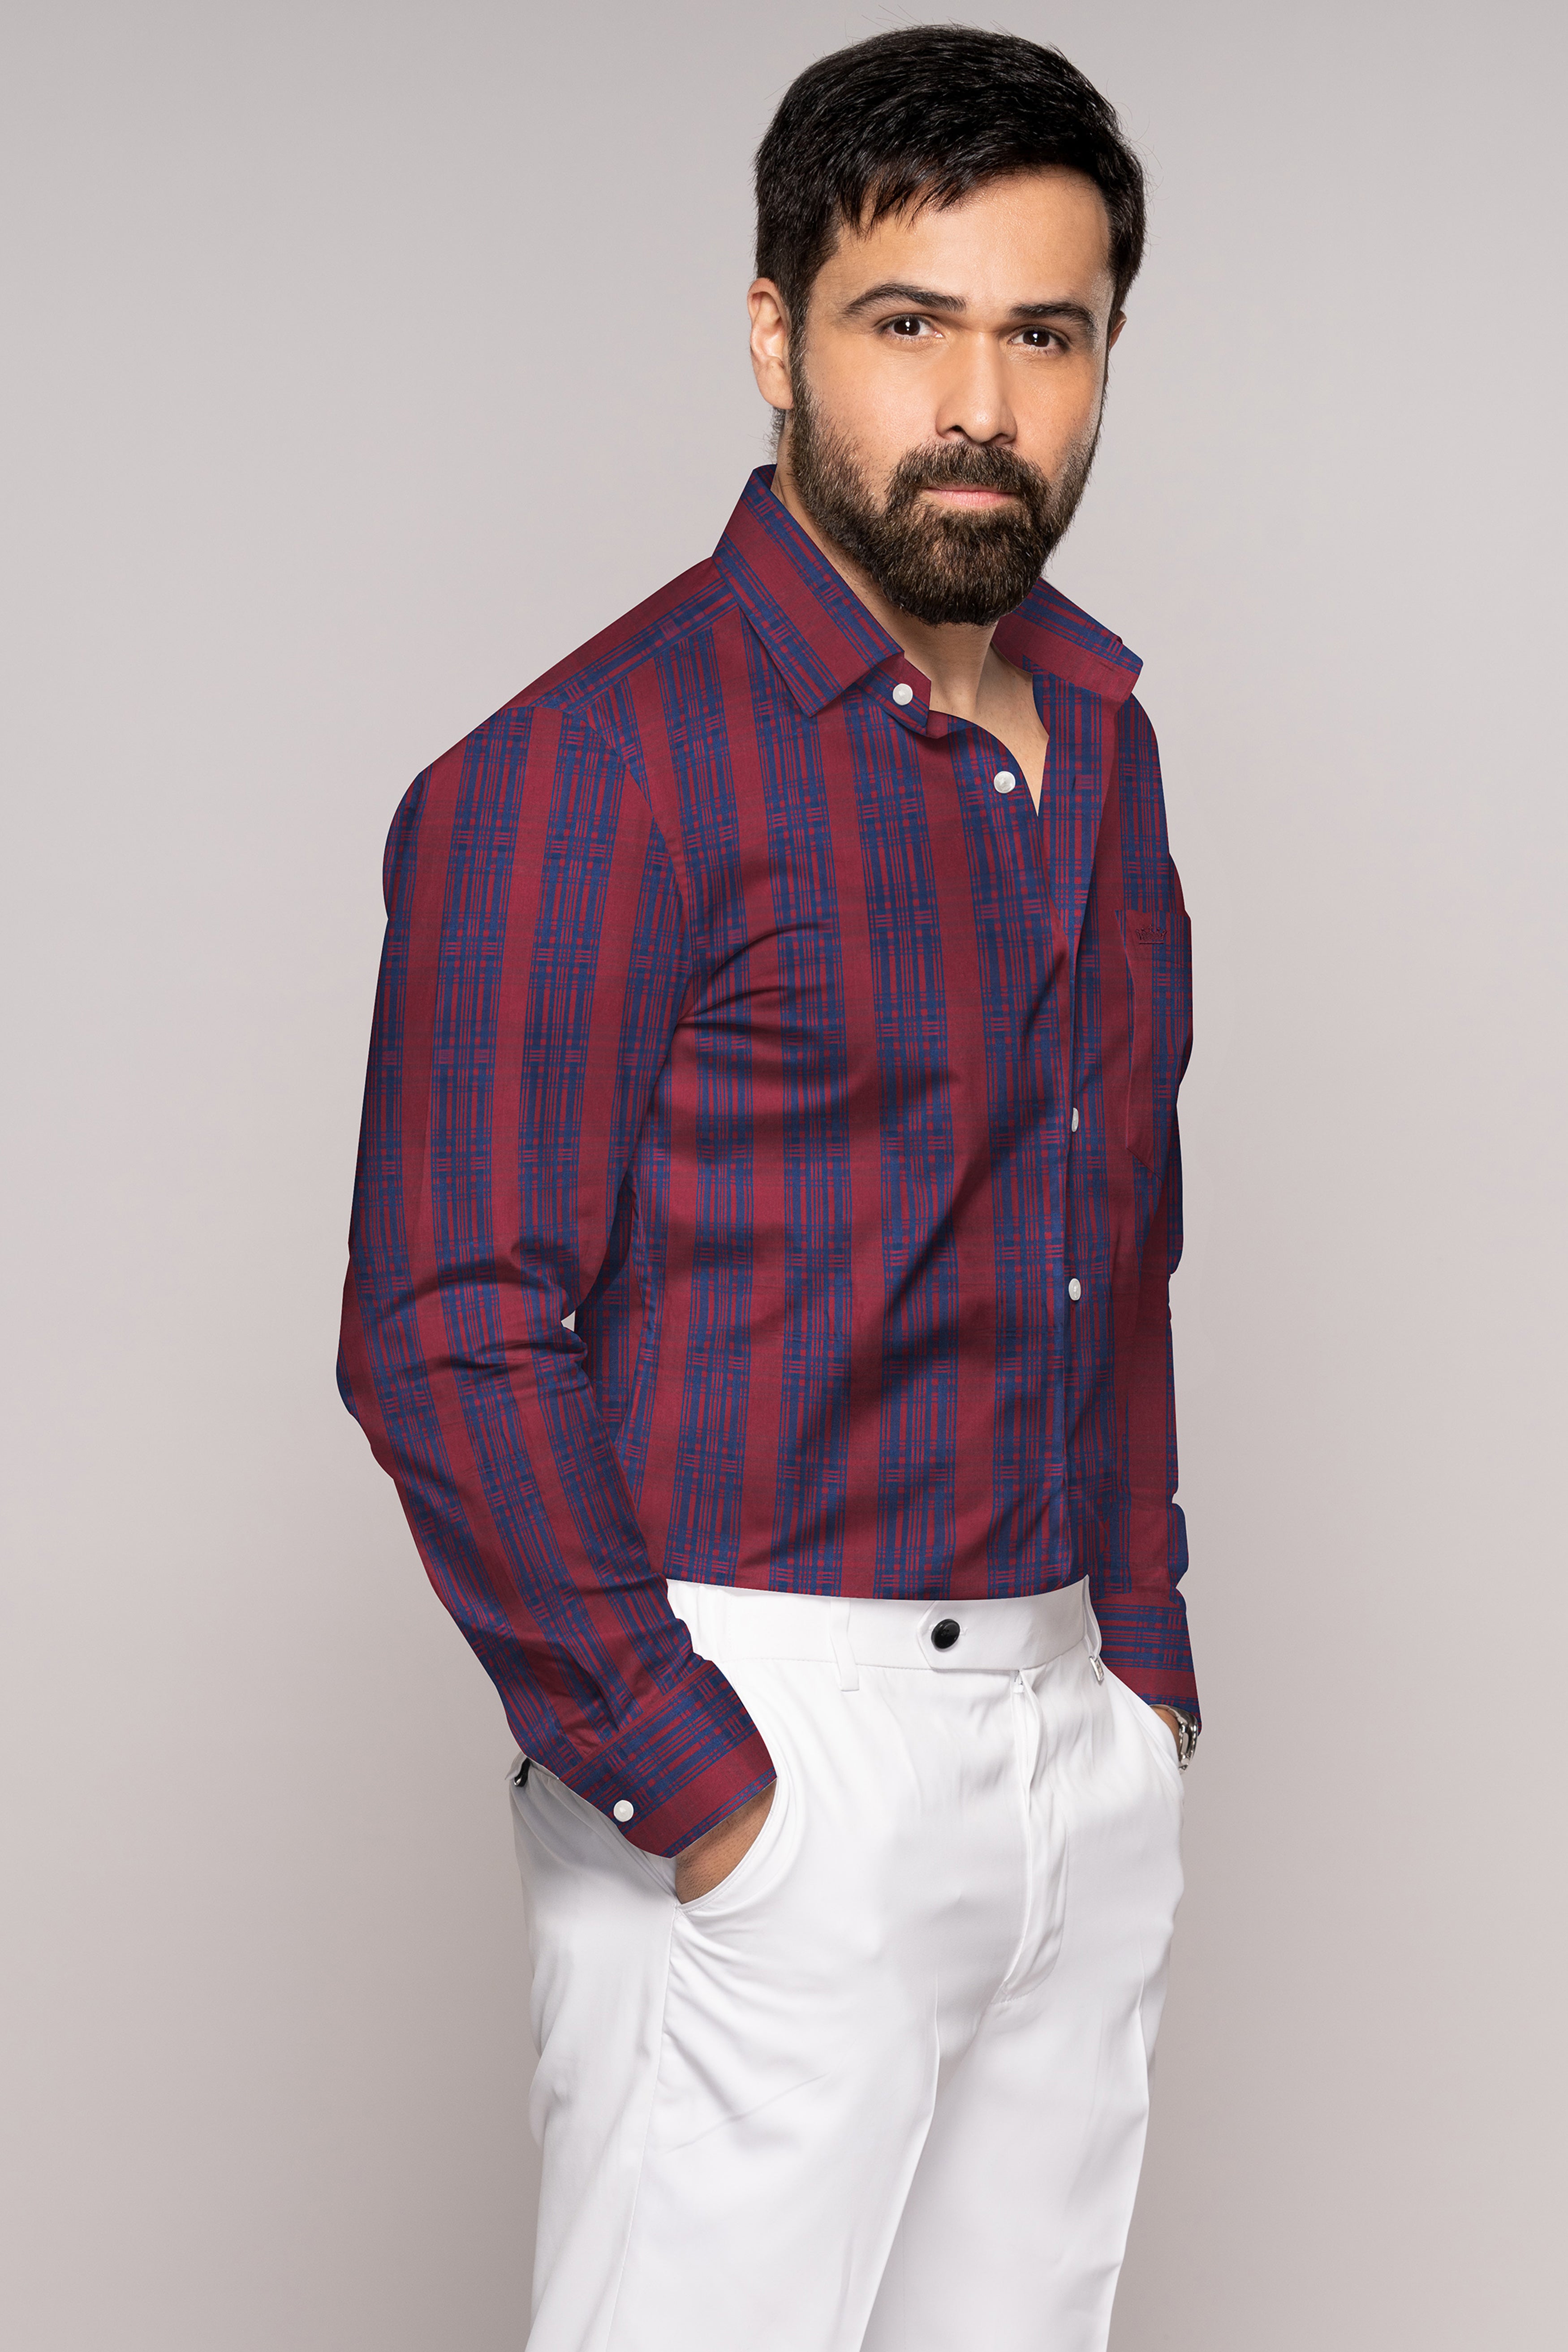 Auburn Red with Fiord Blue Jacquard Textured Giza Cotton Shirt